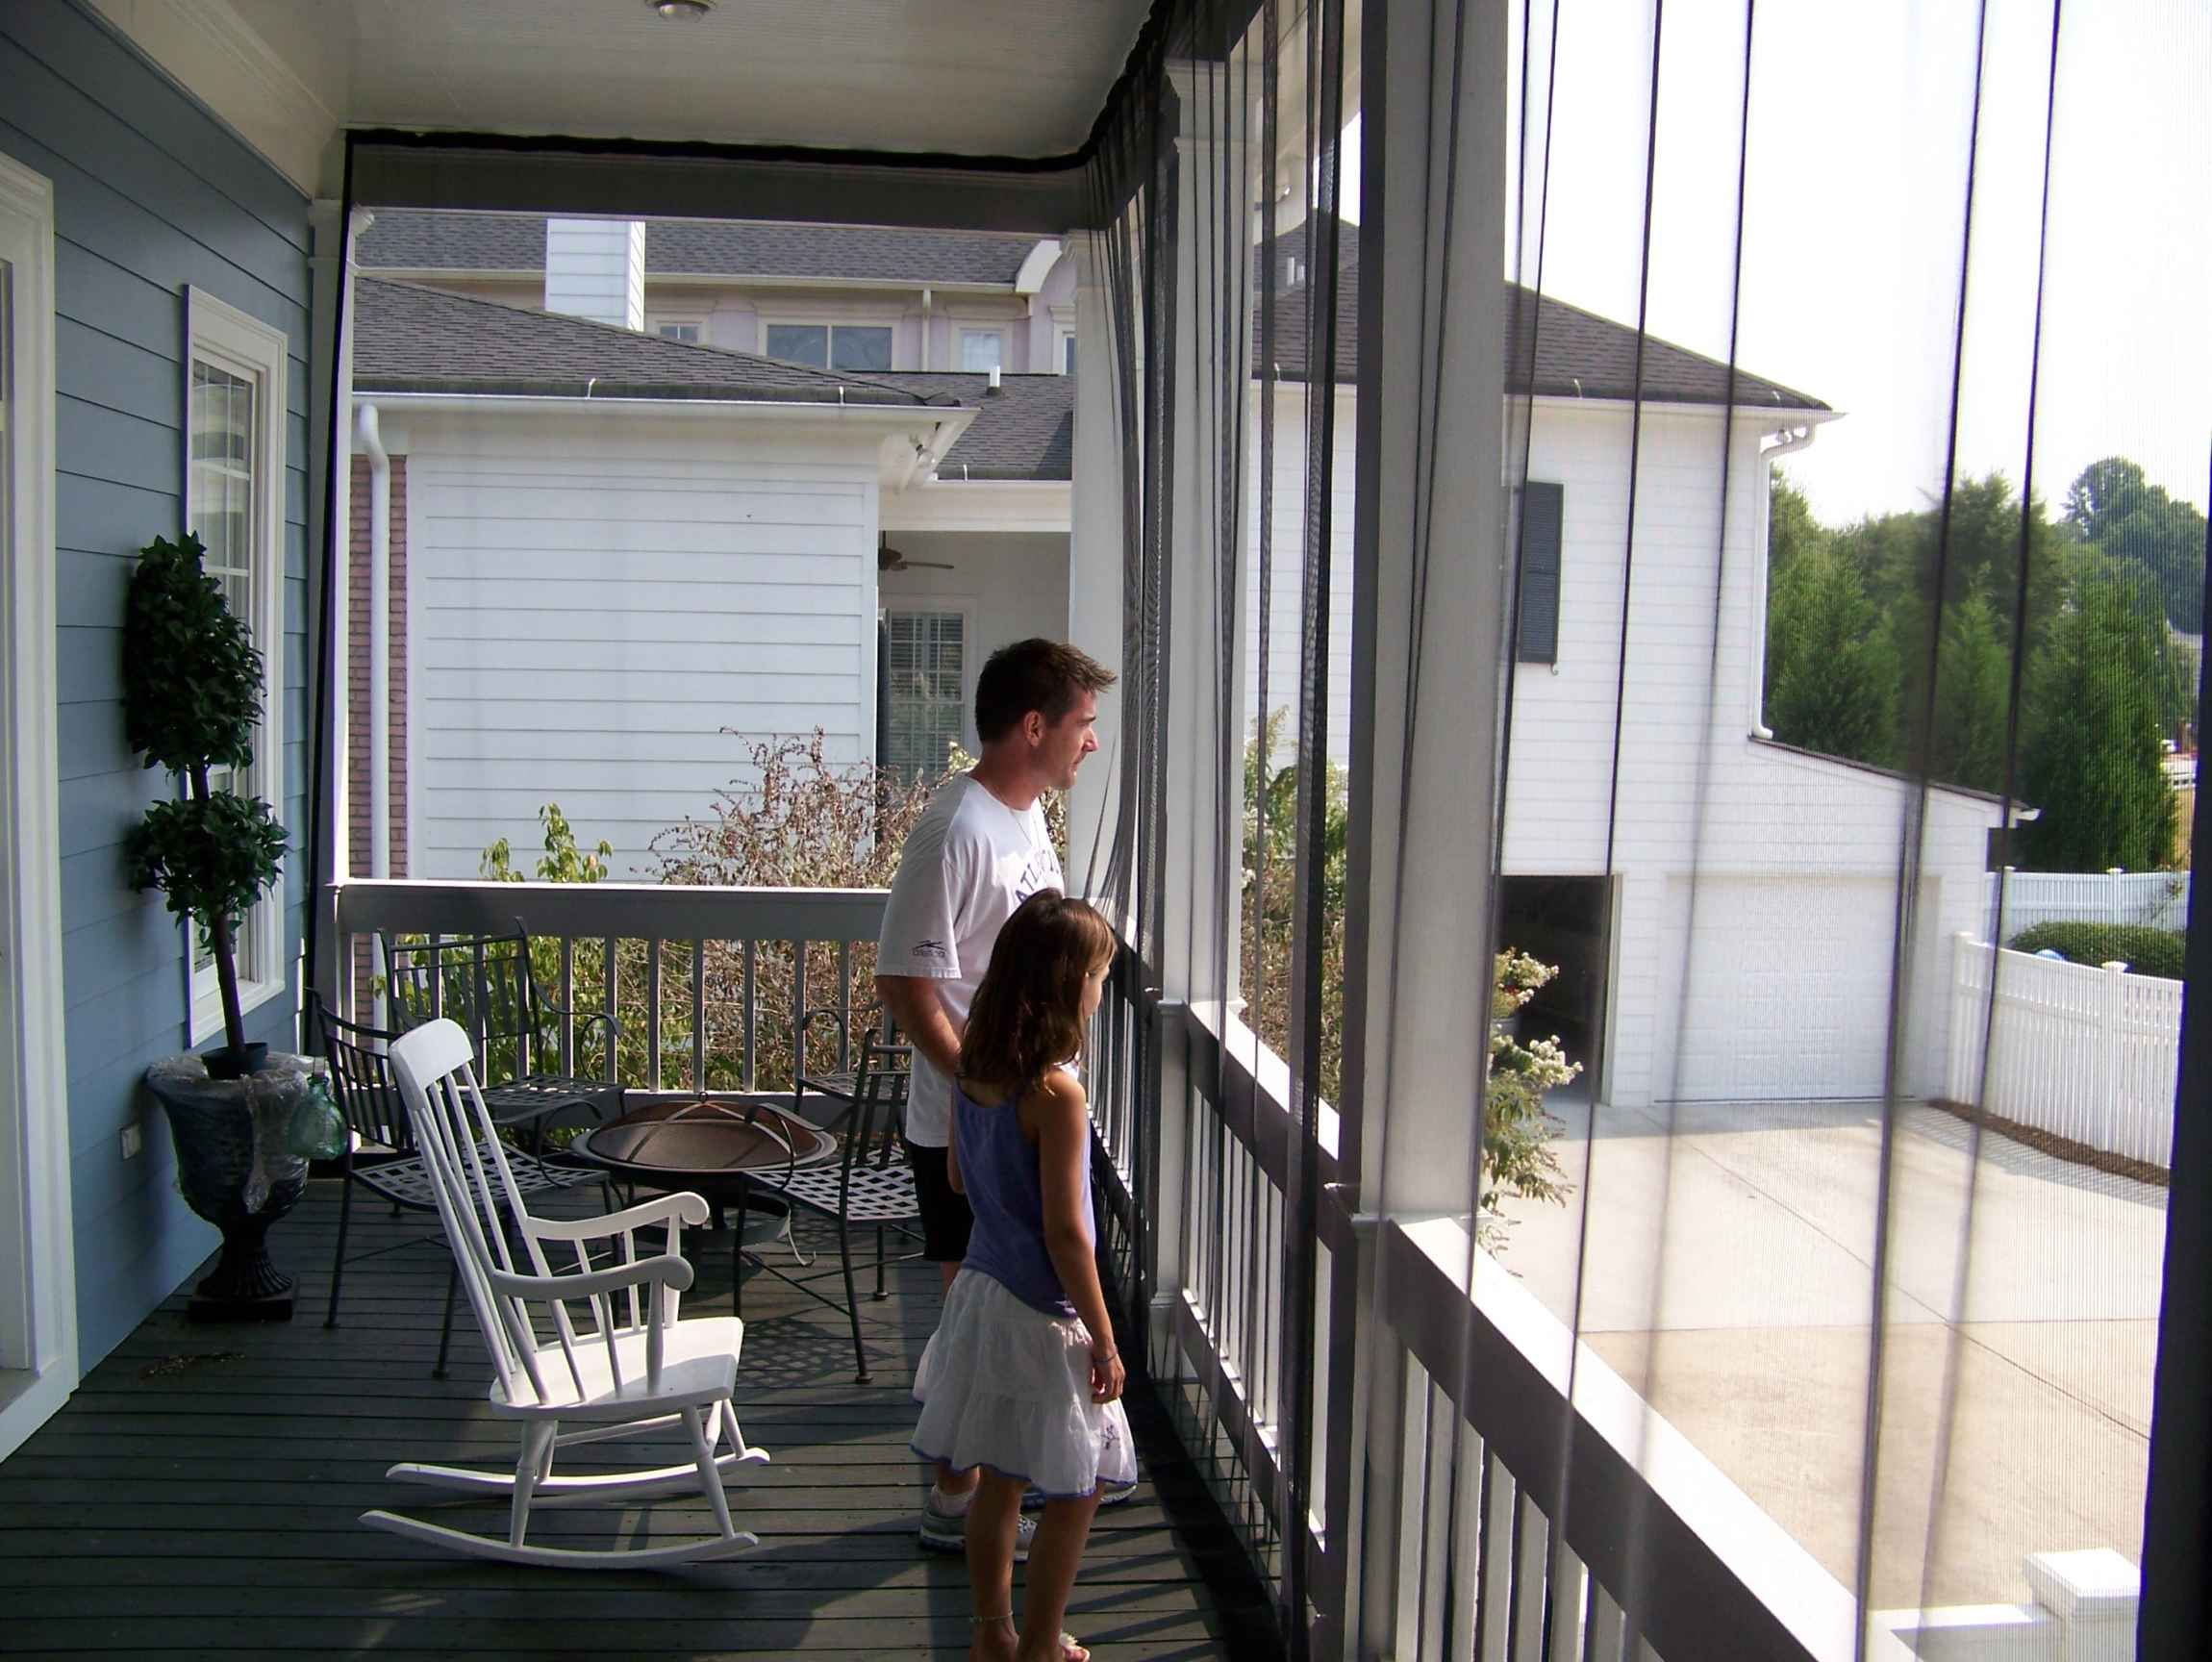 Mosquito Netting Mesh Curtains For The Balcony Want For The within size 2300 X 1728